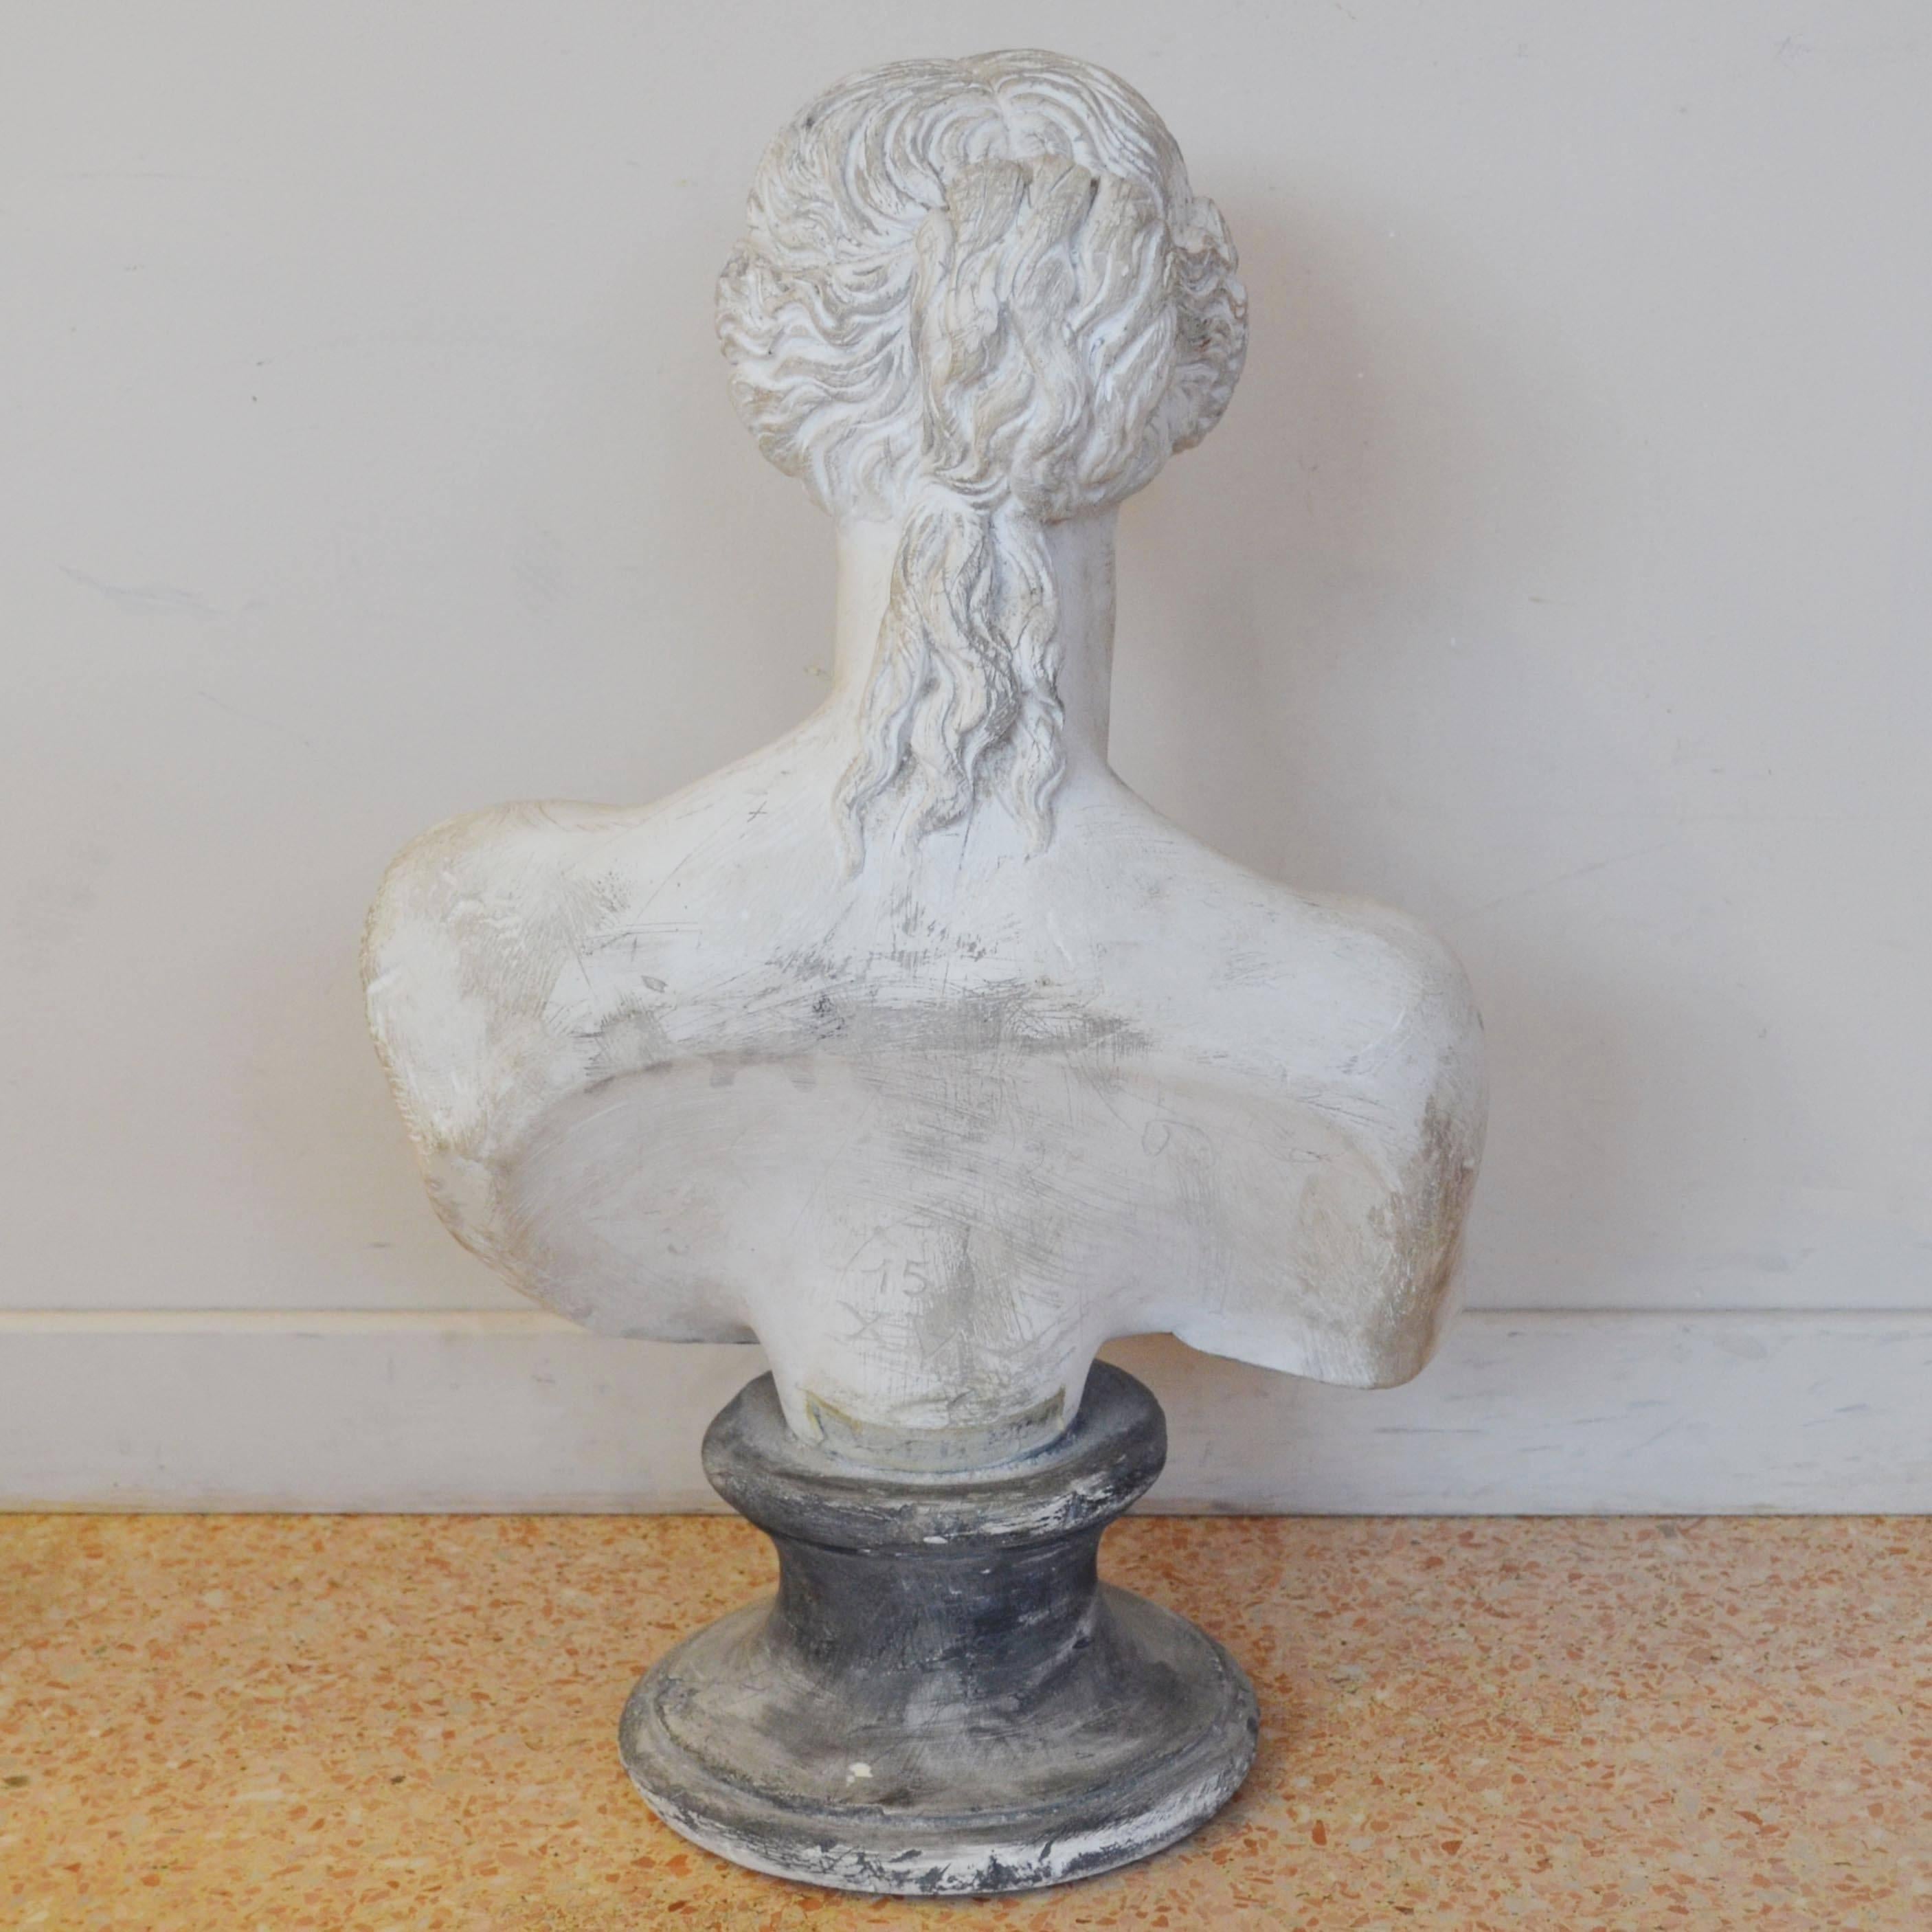 Plaster bust representing Venus made in Italy, circa 1940s. It is in its original patina, upon request we can clean it a bit to re-establish the white color.

To have a (fast and out of interest) shipment quotation, we just need the destination zip